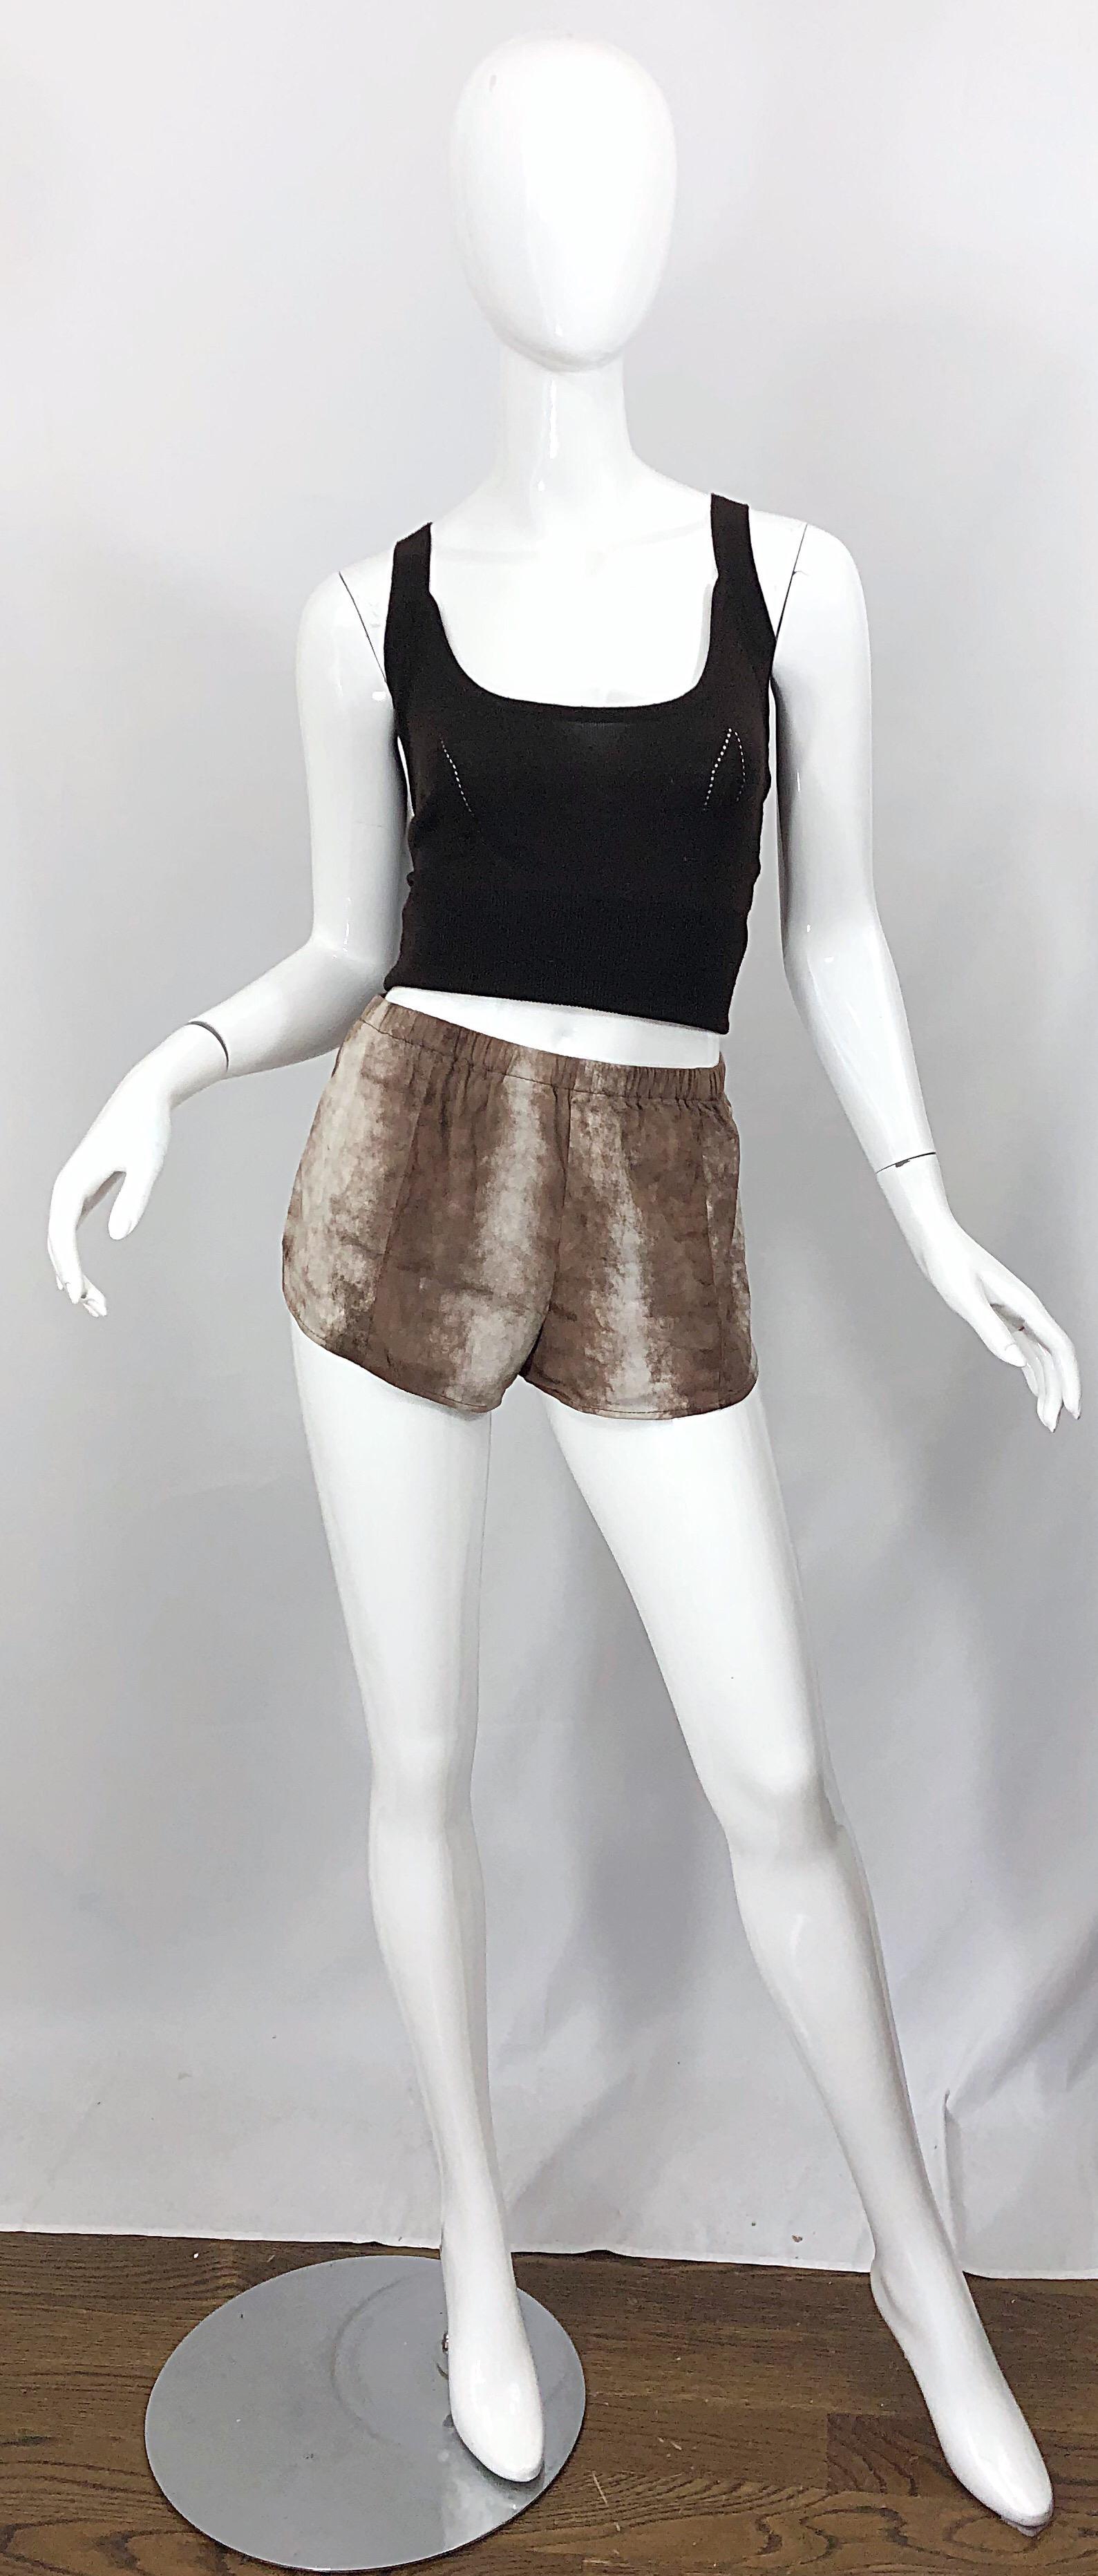 Amazing and collectible LOVE, MELODY early 80s sheepskin leather hot pants / shorts! Super soft ombre brown and taupe sheepskin leather with an elastic waistband that stretches to fit. Track style that is so on trend right now! The brown cashmere